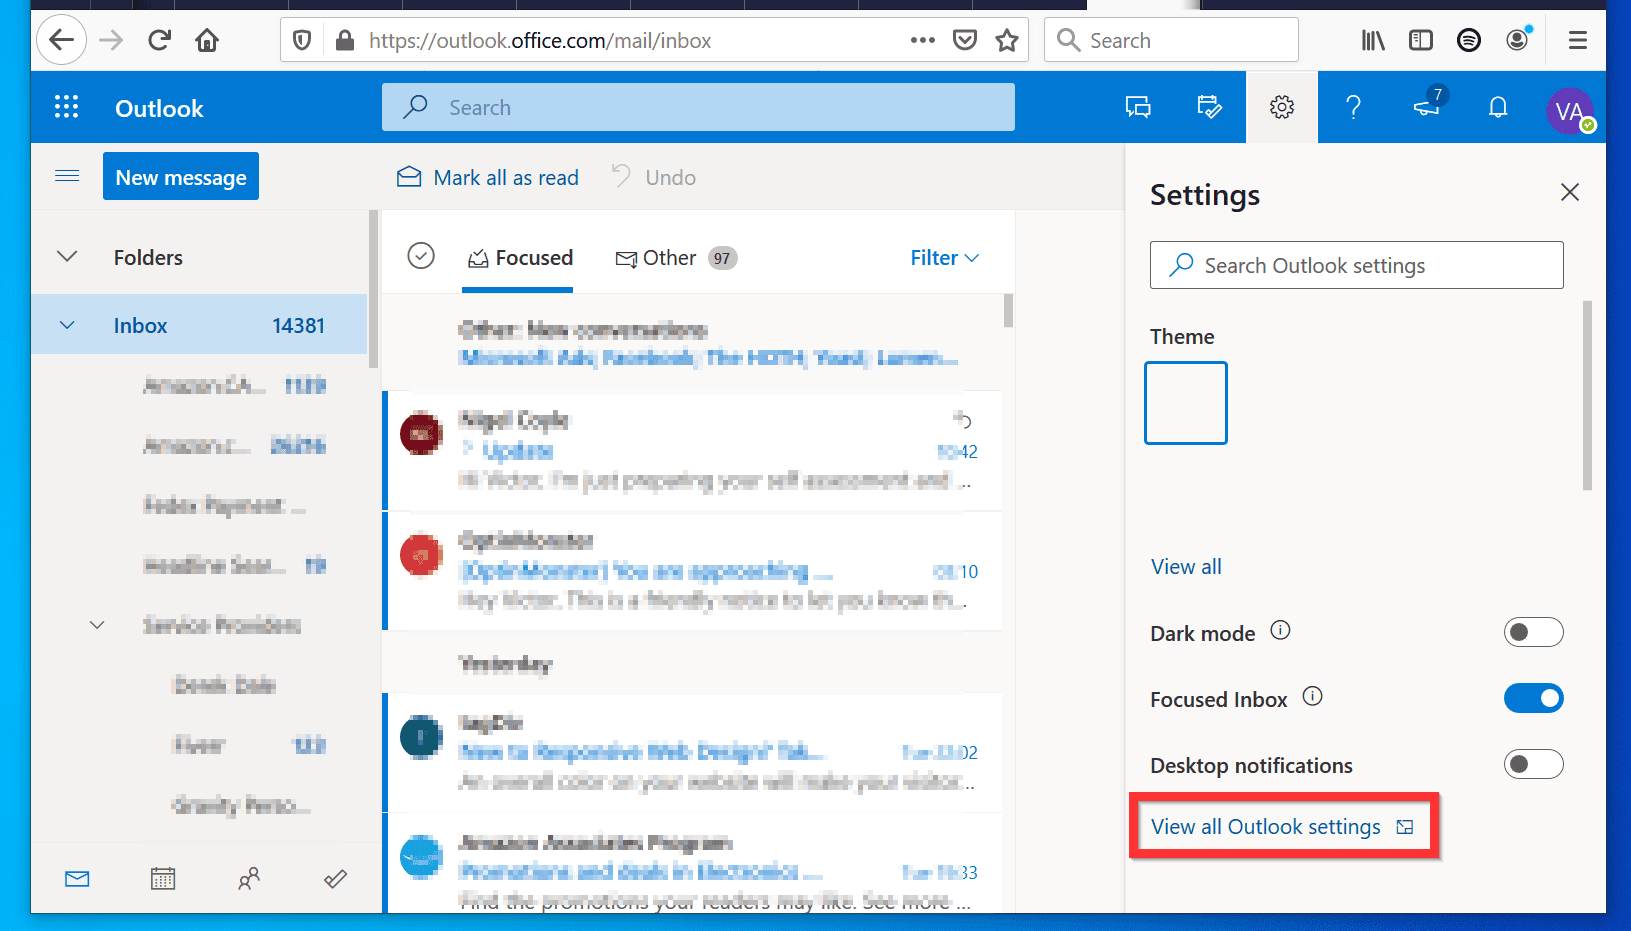 How to Change Signature in Outlook 365 from a Desktop or Smartphone